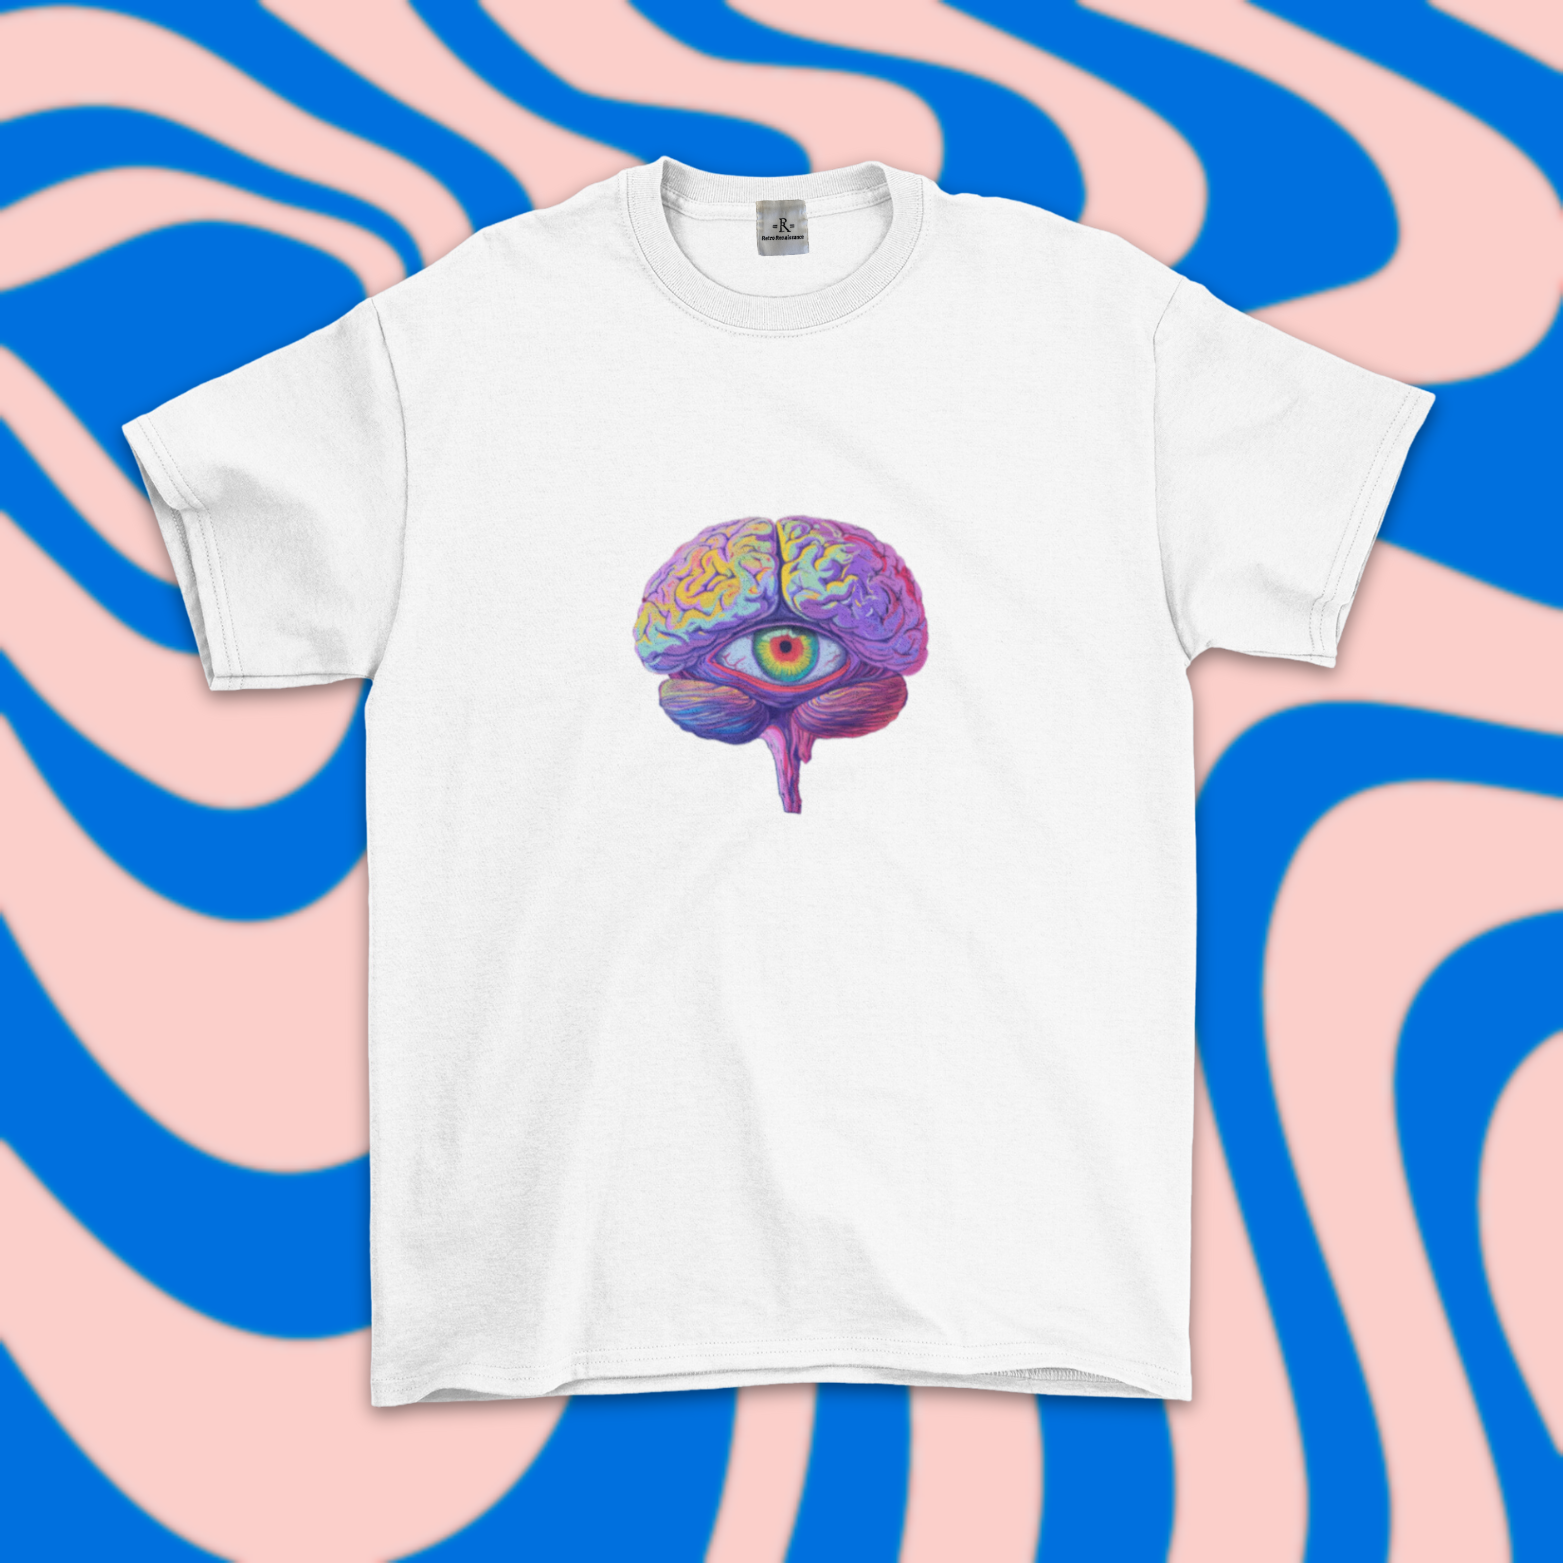 Retro Renaissance Psychedelic Tee, The Mind's Eye